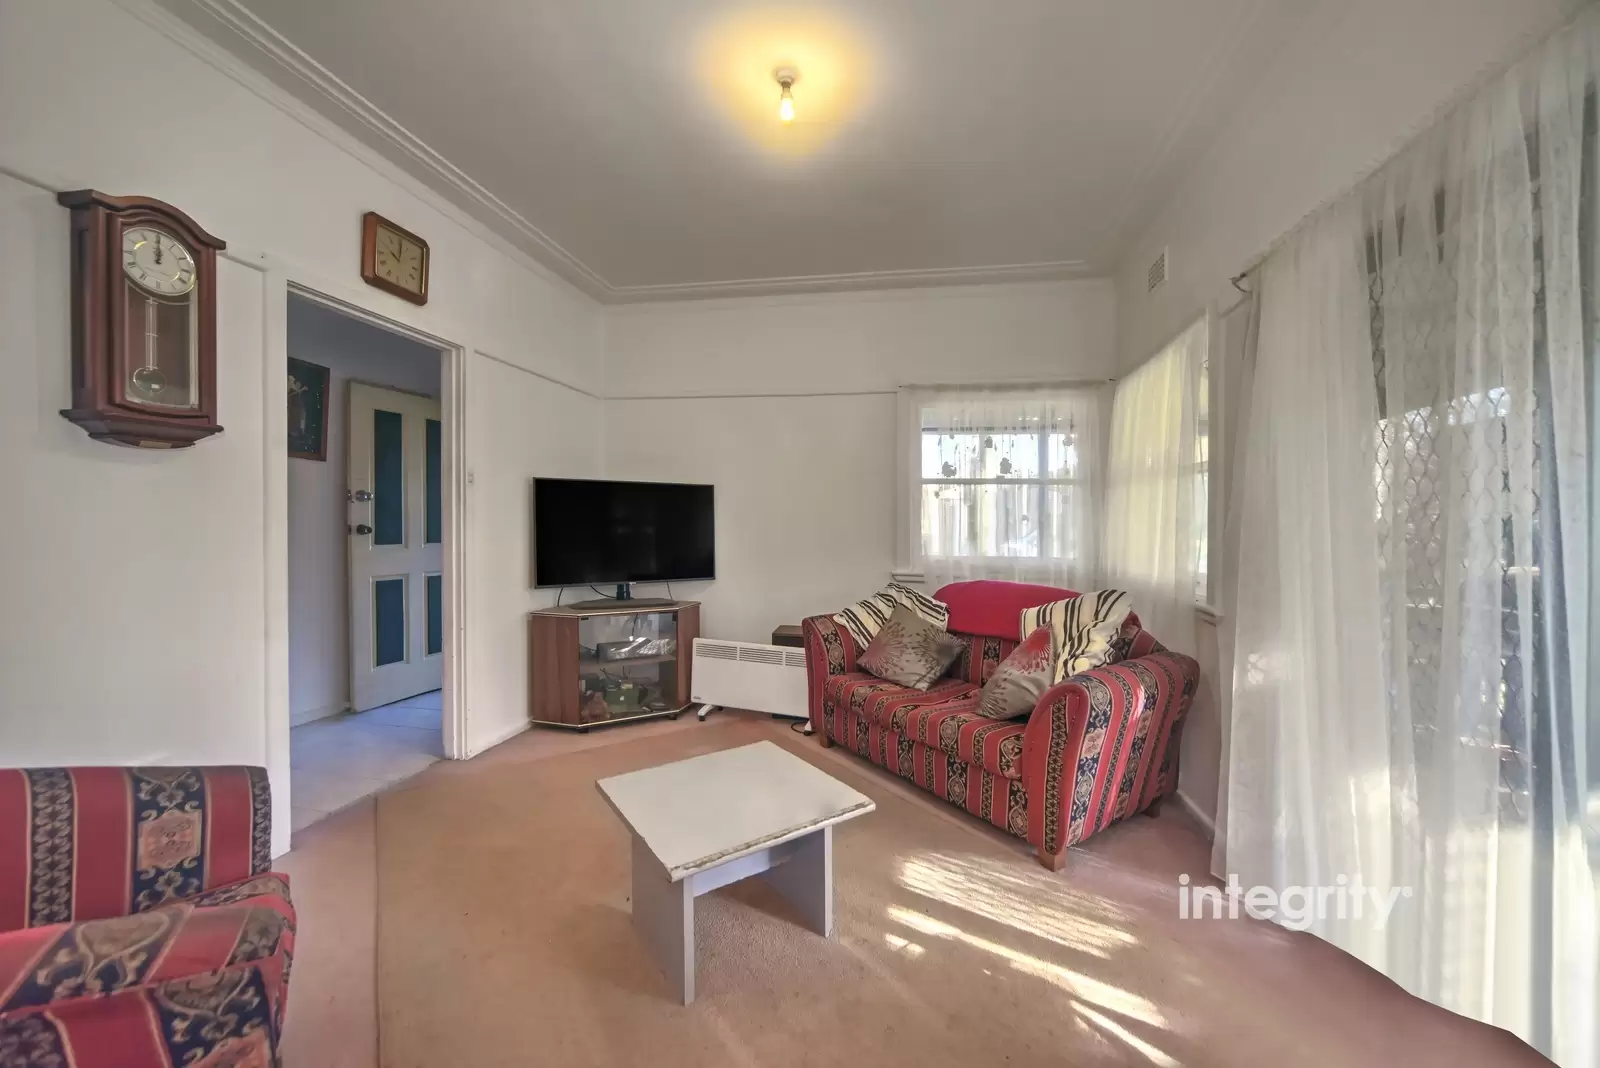 17 Maybush Way, West Nowra Sold by Integrity Real Estate - image 3